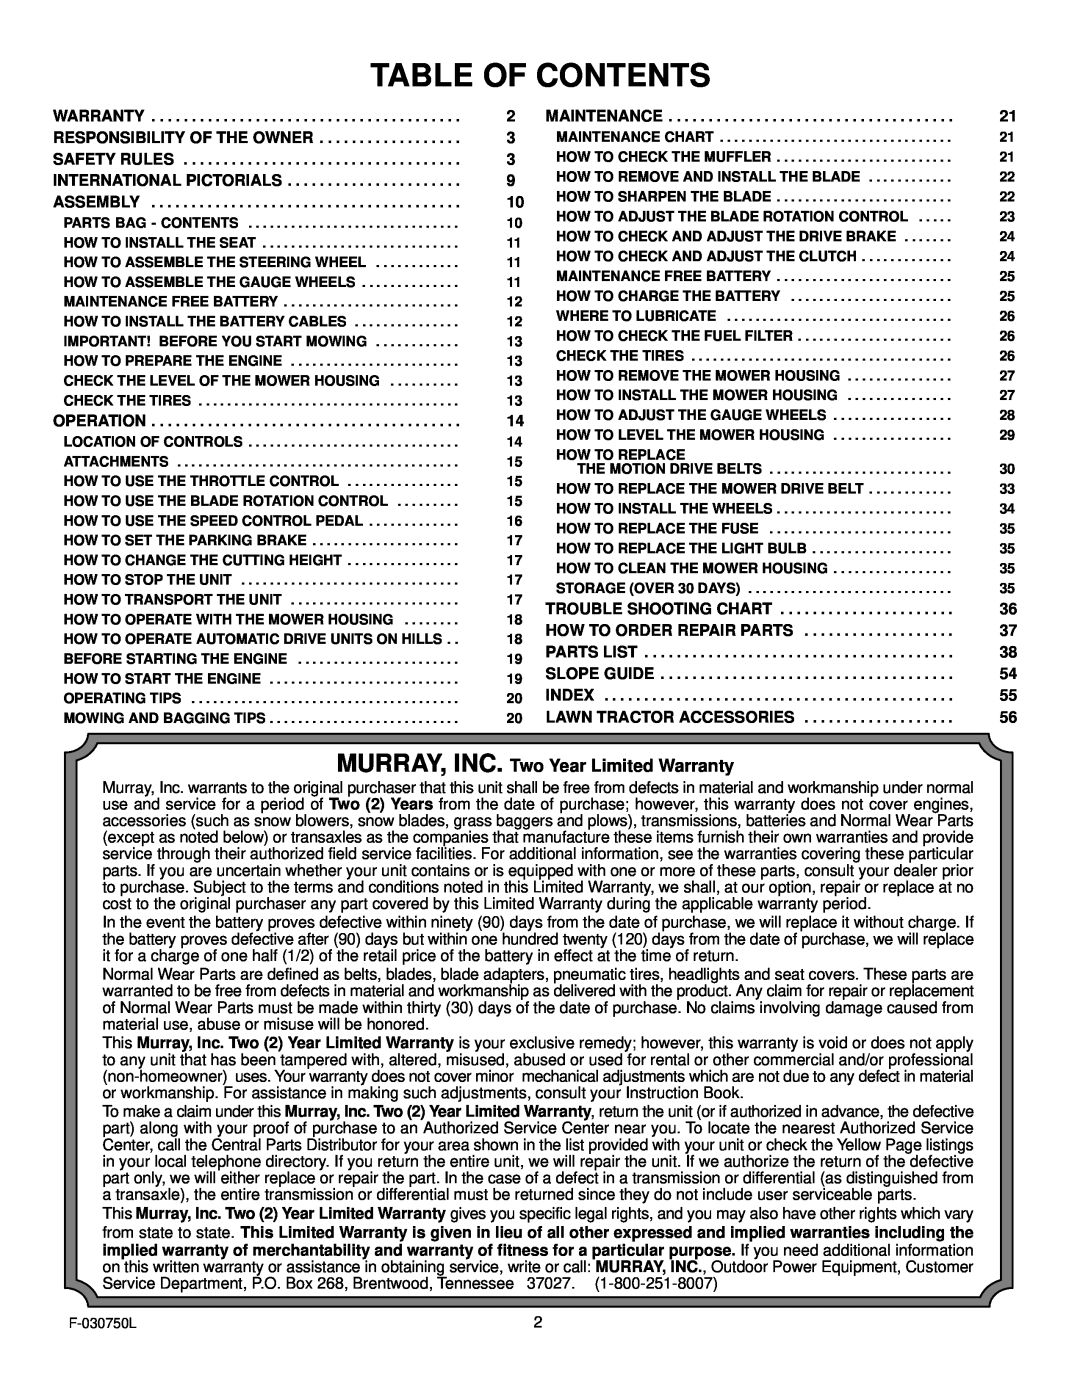 Murray 425306x48A manual Table Of Contents, MURRAY, INC. Two Year Limited Warranty 